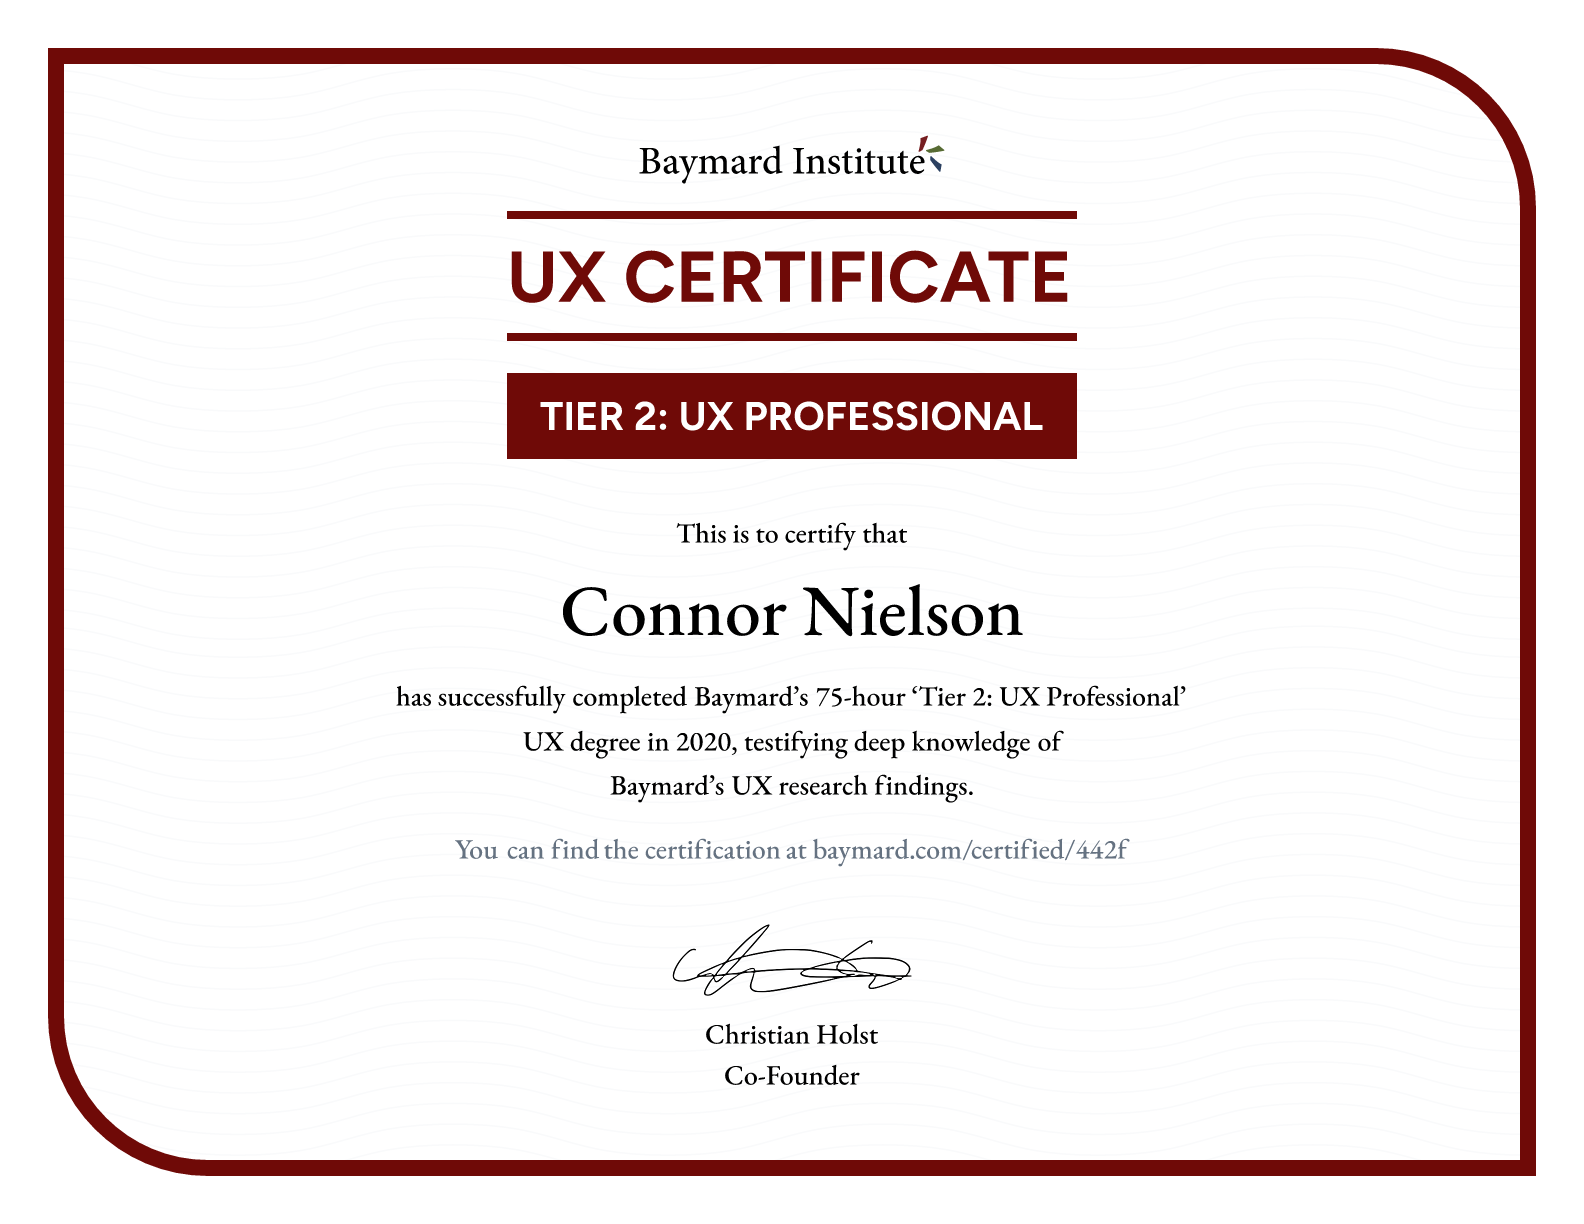 Connor Nielson’s certificate